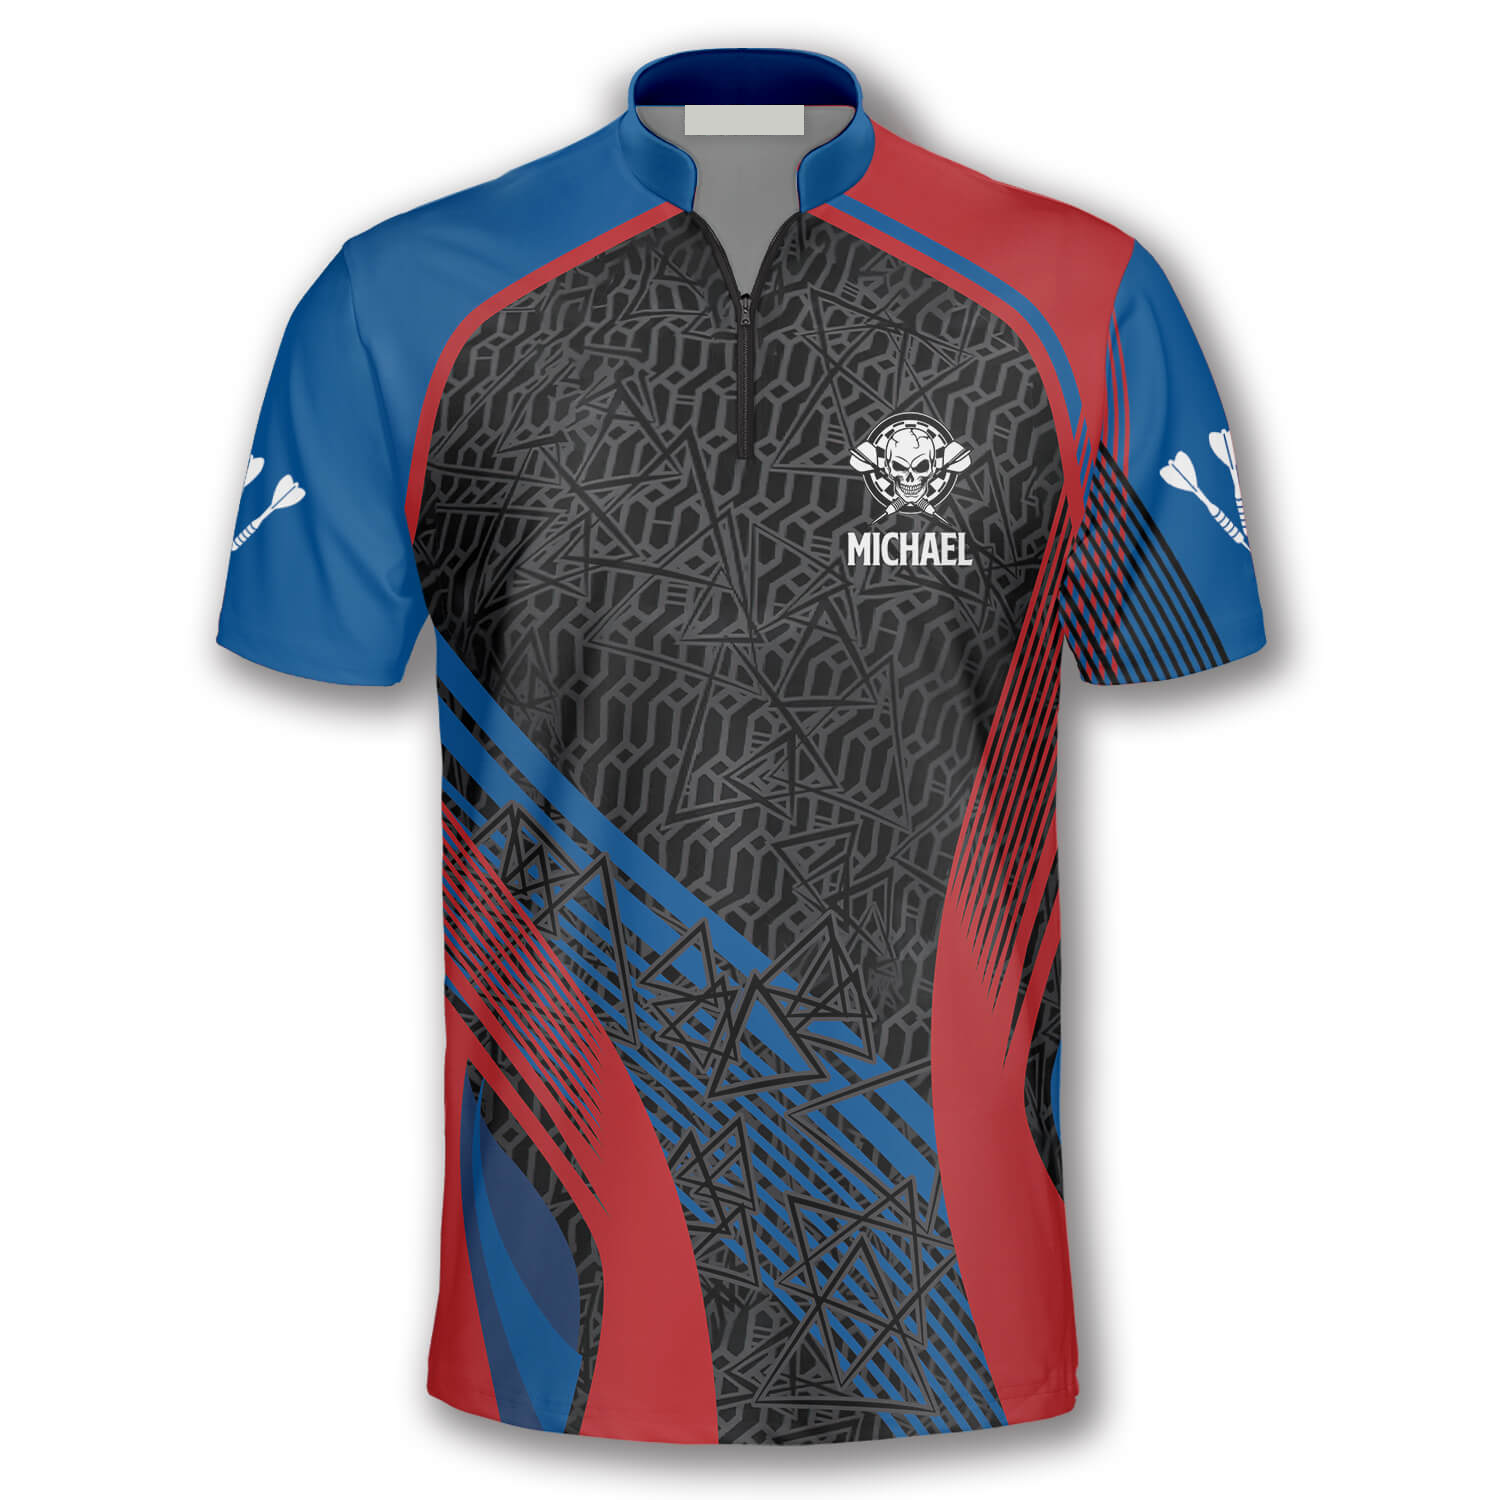 Personalized Blue & Red Skull Custom Darts Jerseys for Men/ Idea Gift for Dart Players